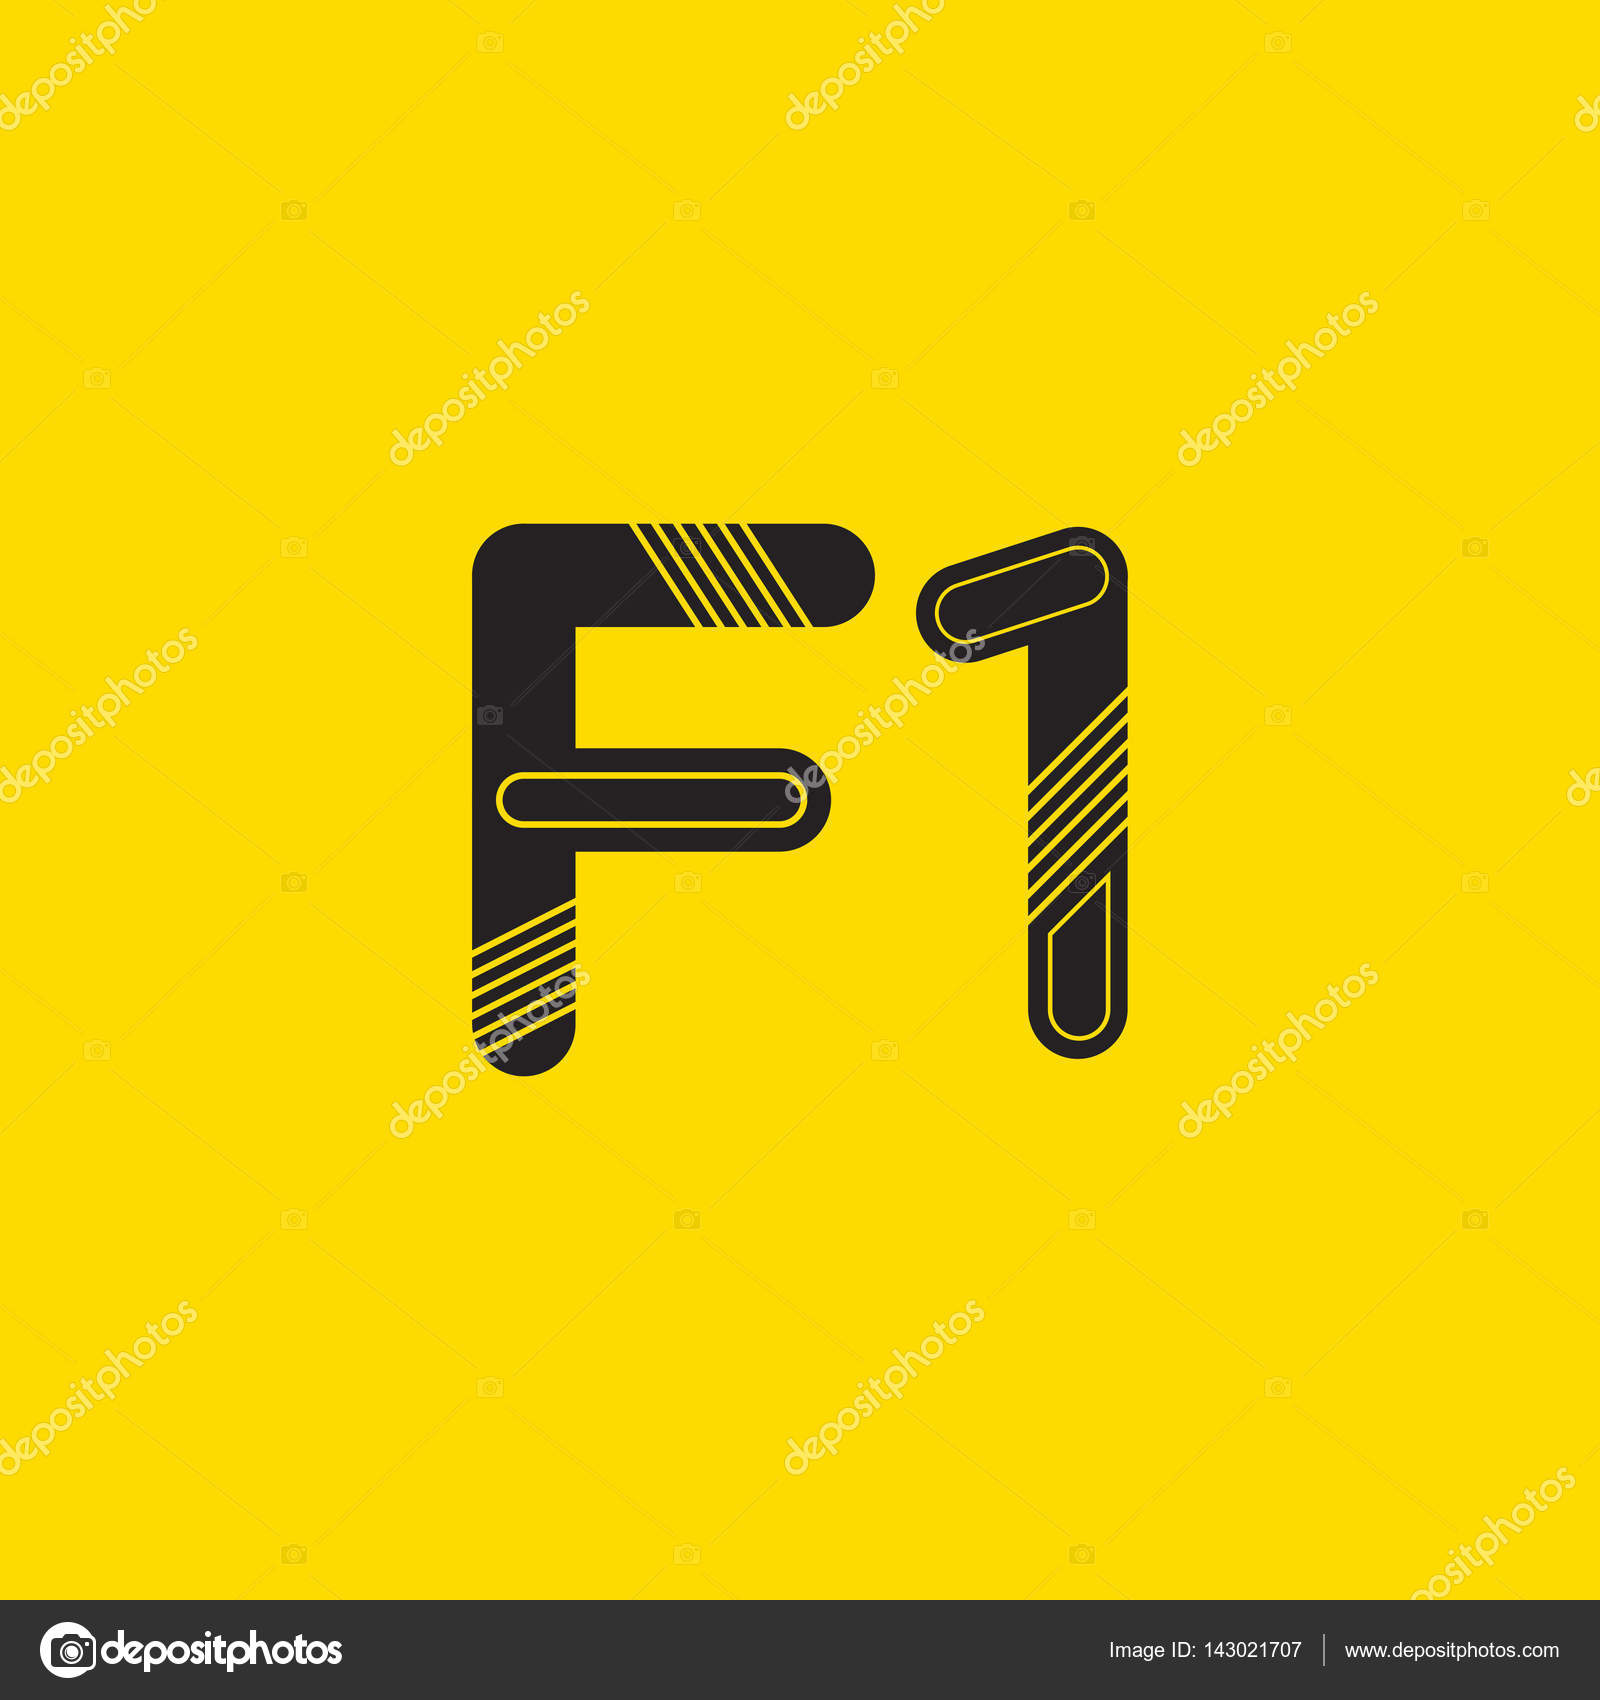 F1 Letter And Number Logo Icon Vector Image By C Brainbistro Vector Stock 143021707 🙌 pick your 2021 dream team and you could win exclusive prizes! https depositphotos com 143021707 stock illustration f1 letter and number logo html